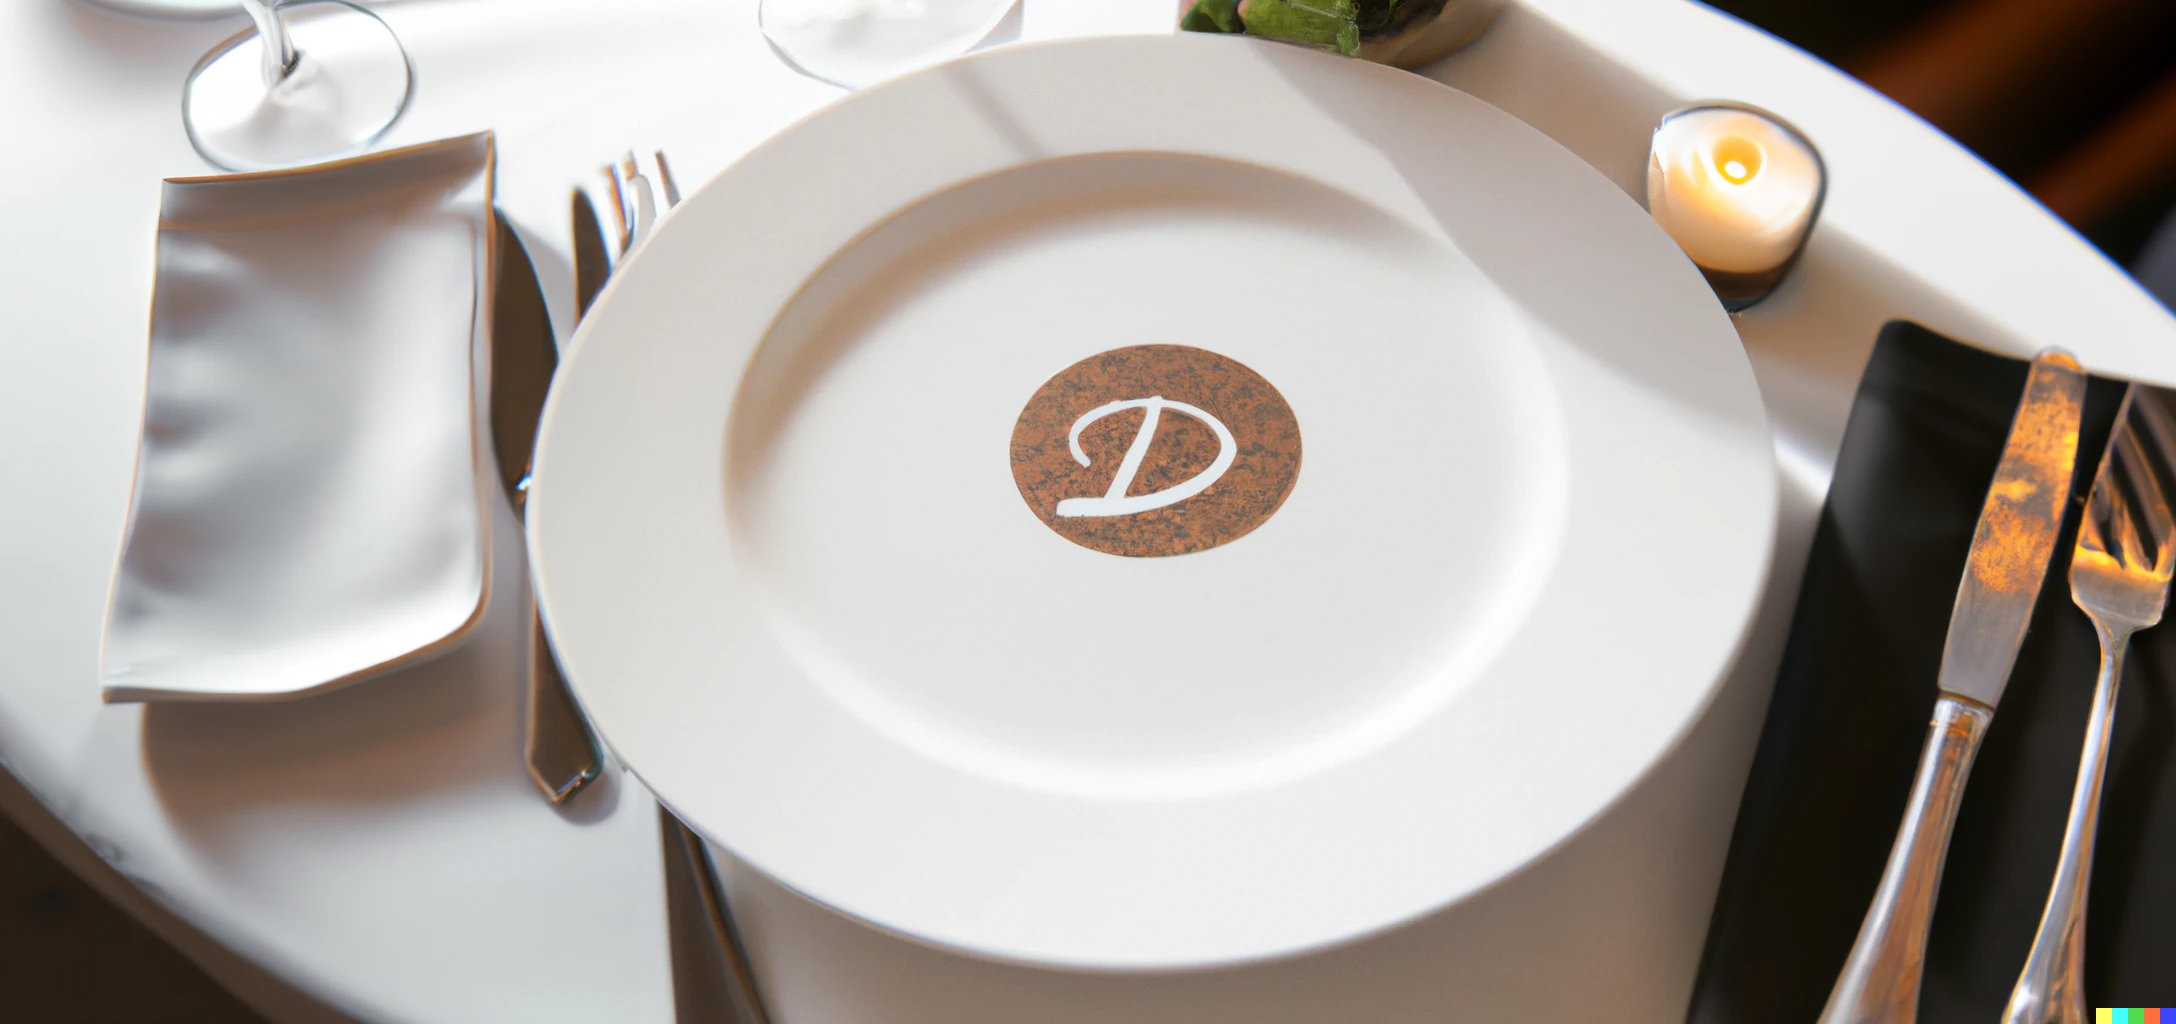 Printed Restaurant Plate With Restaurant Logo Printed On The Face Middle Of The Plate